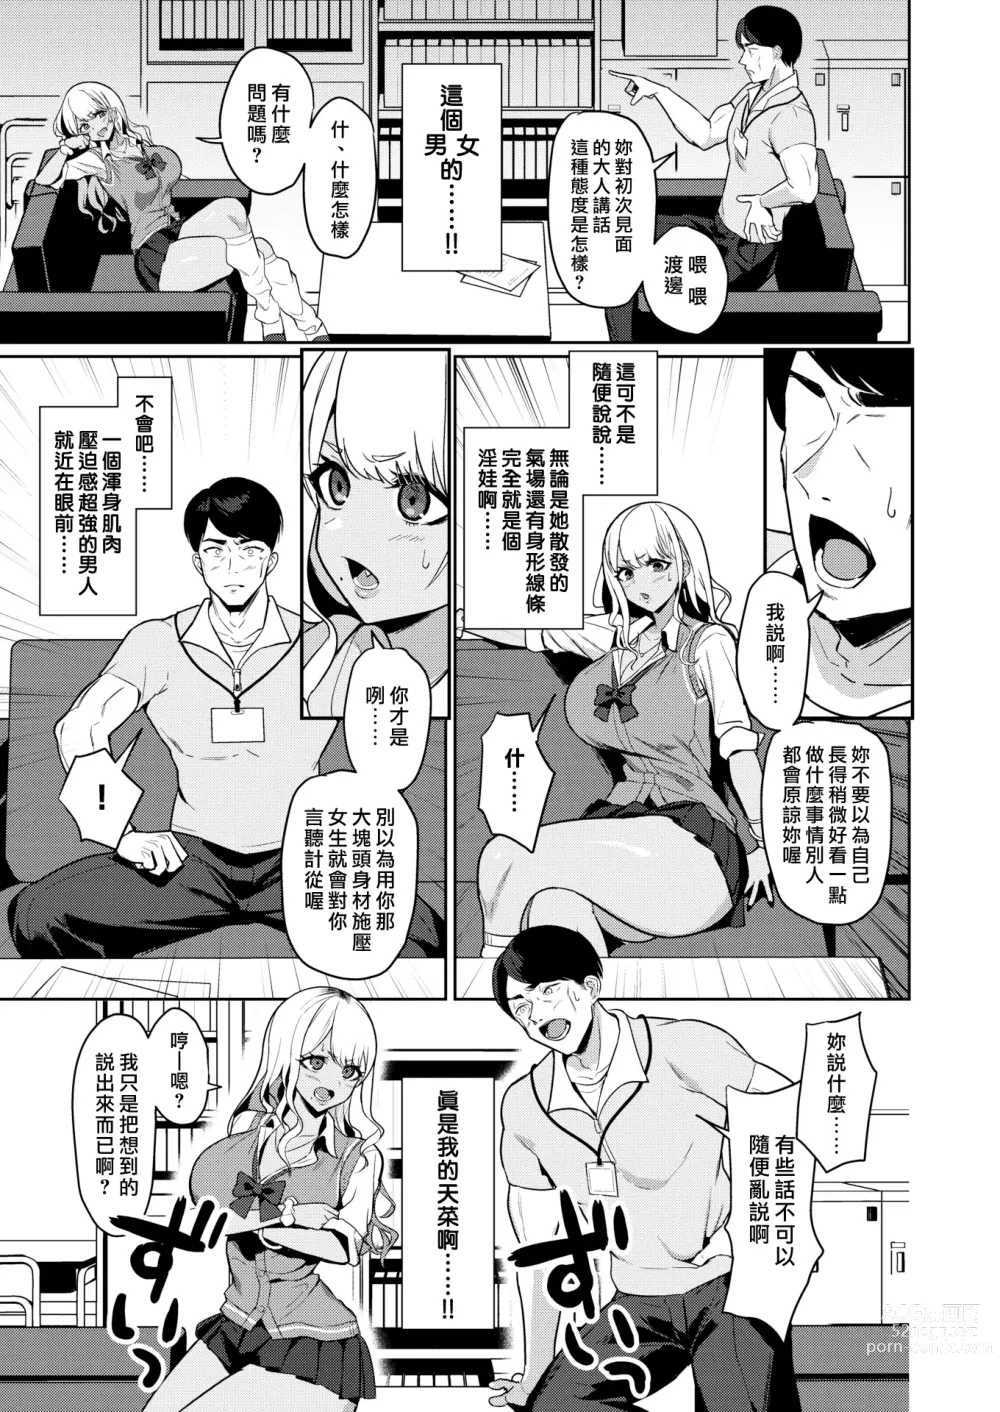 Page 7 of doujinshi センセイなんて大っ嫌い!!